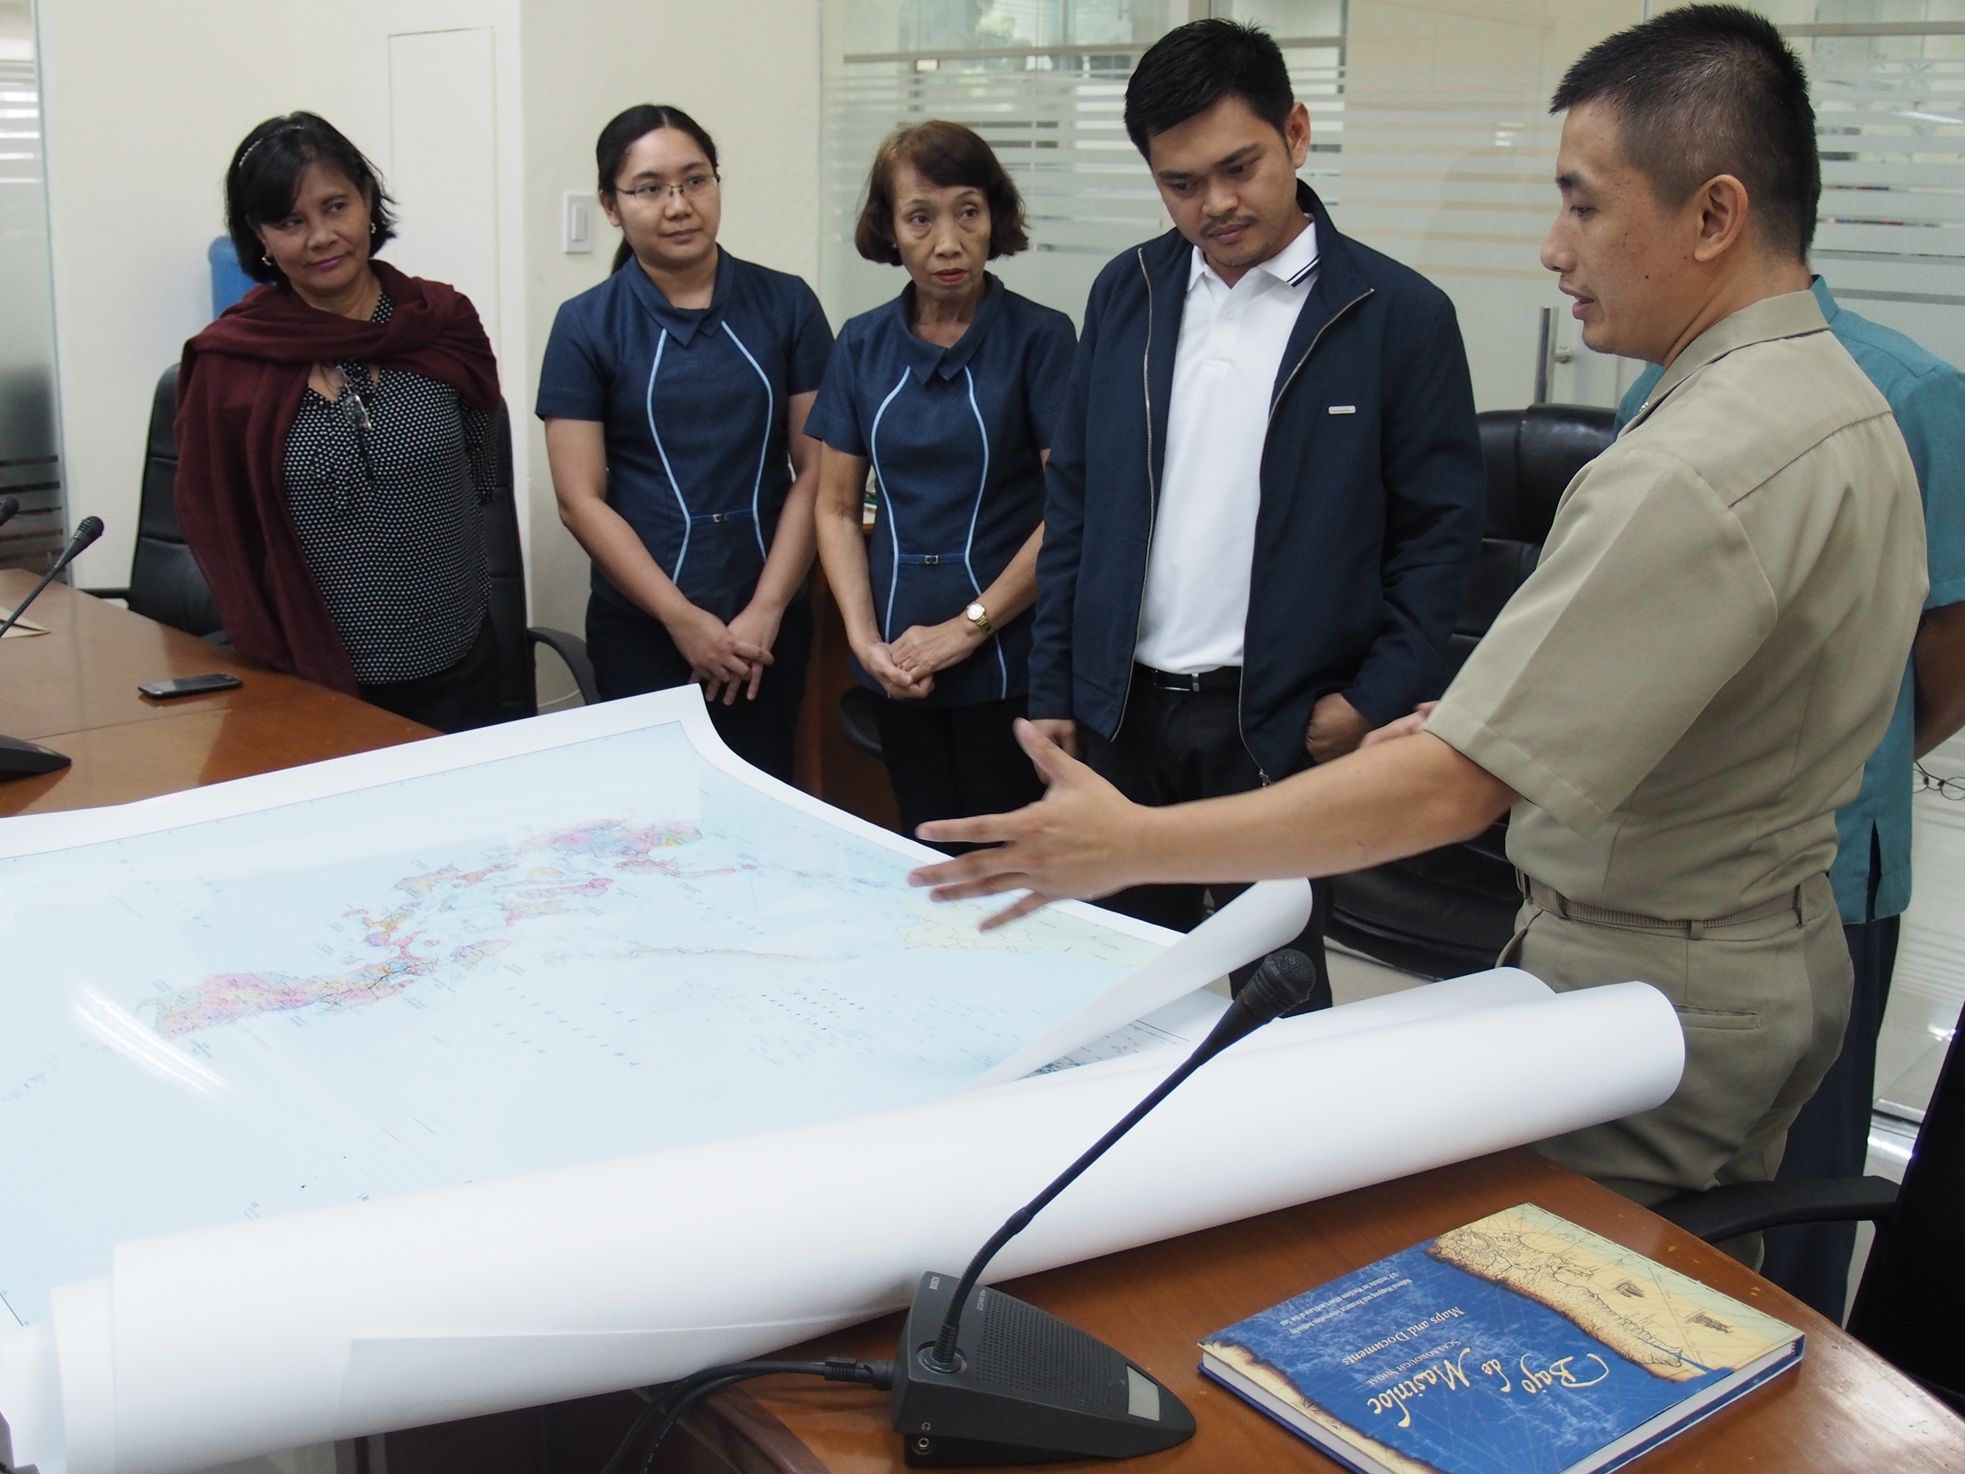 LCdr Luma-ang  distributes maps to National Library